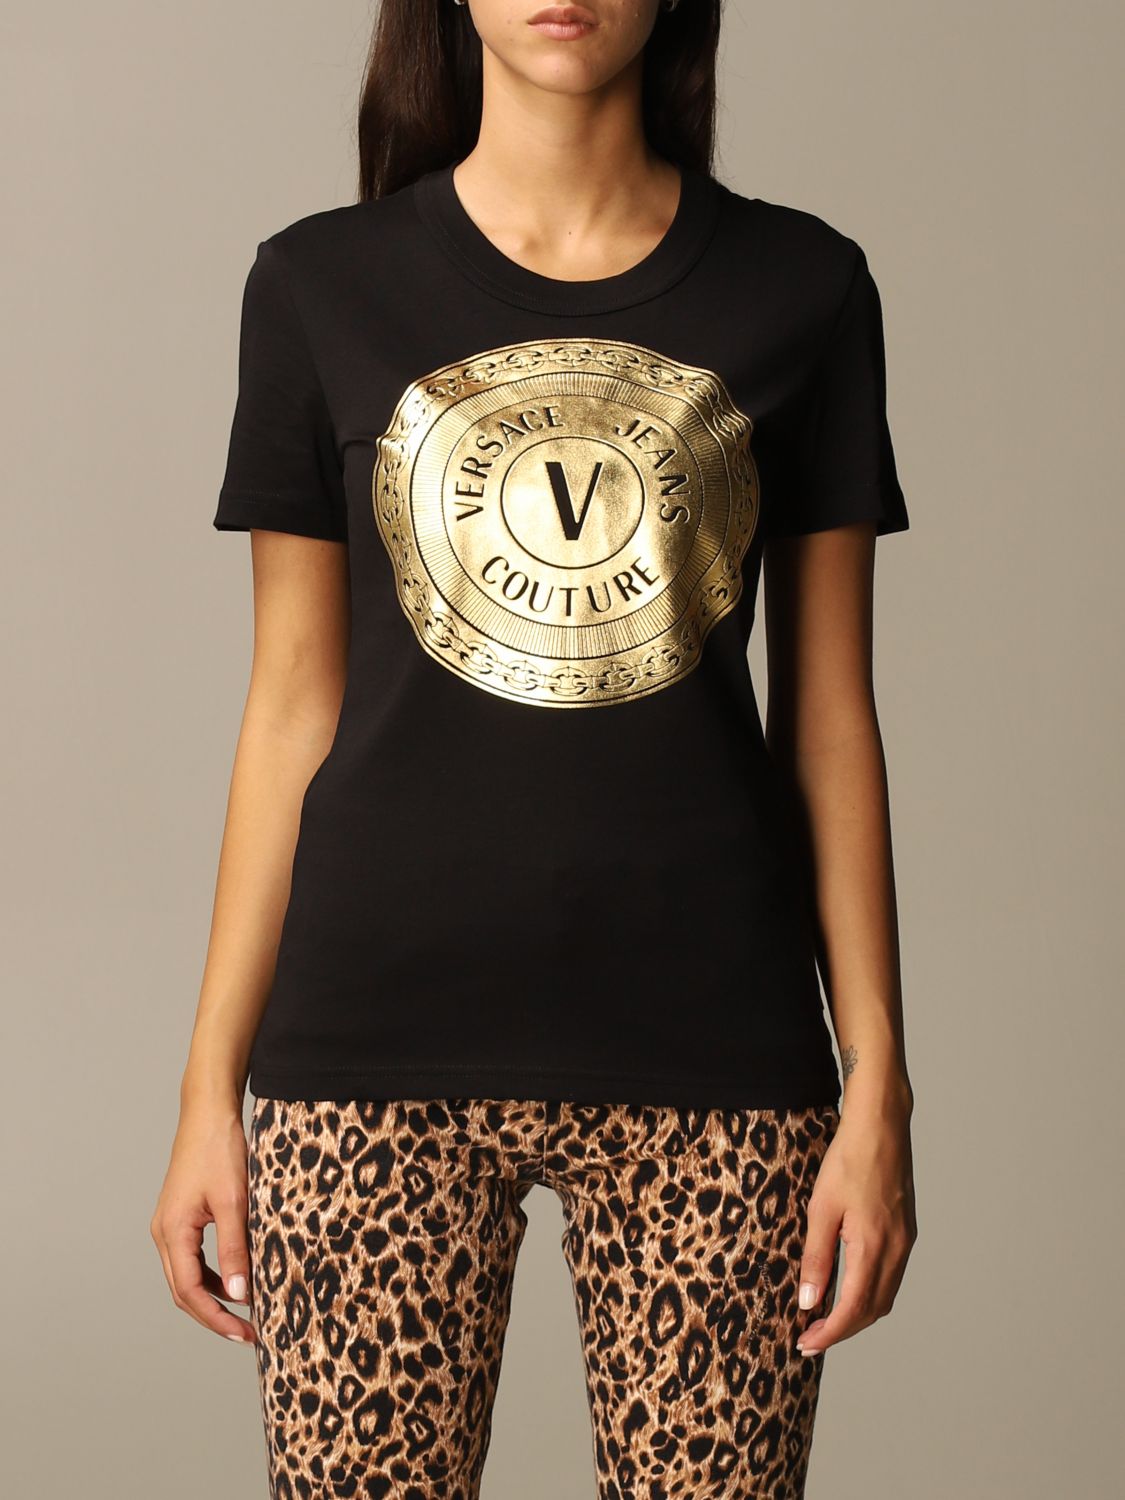 versace jeans couture t shirt